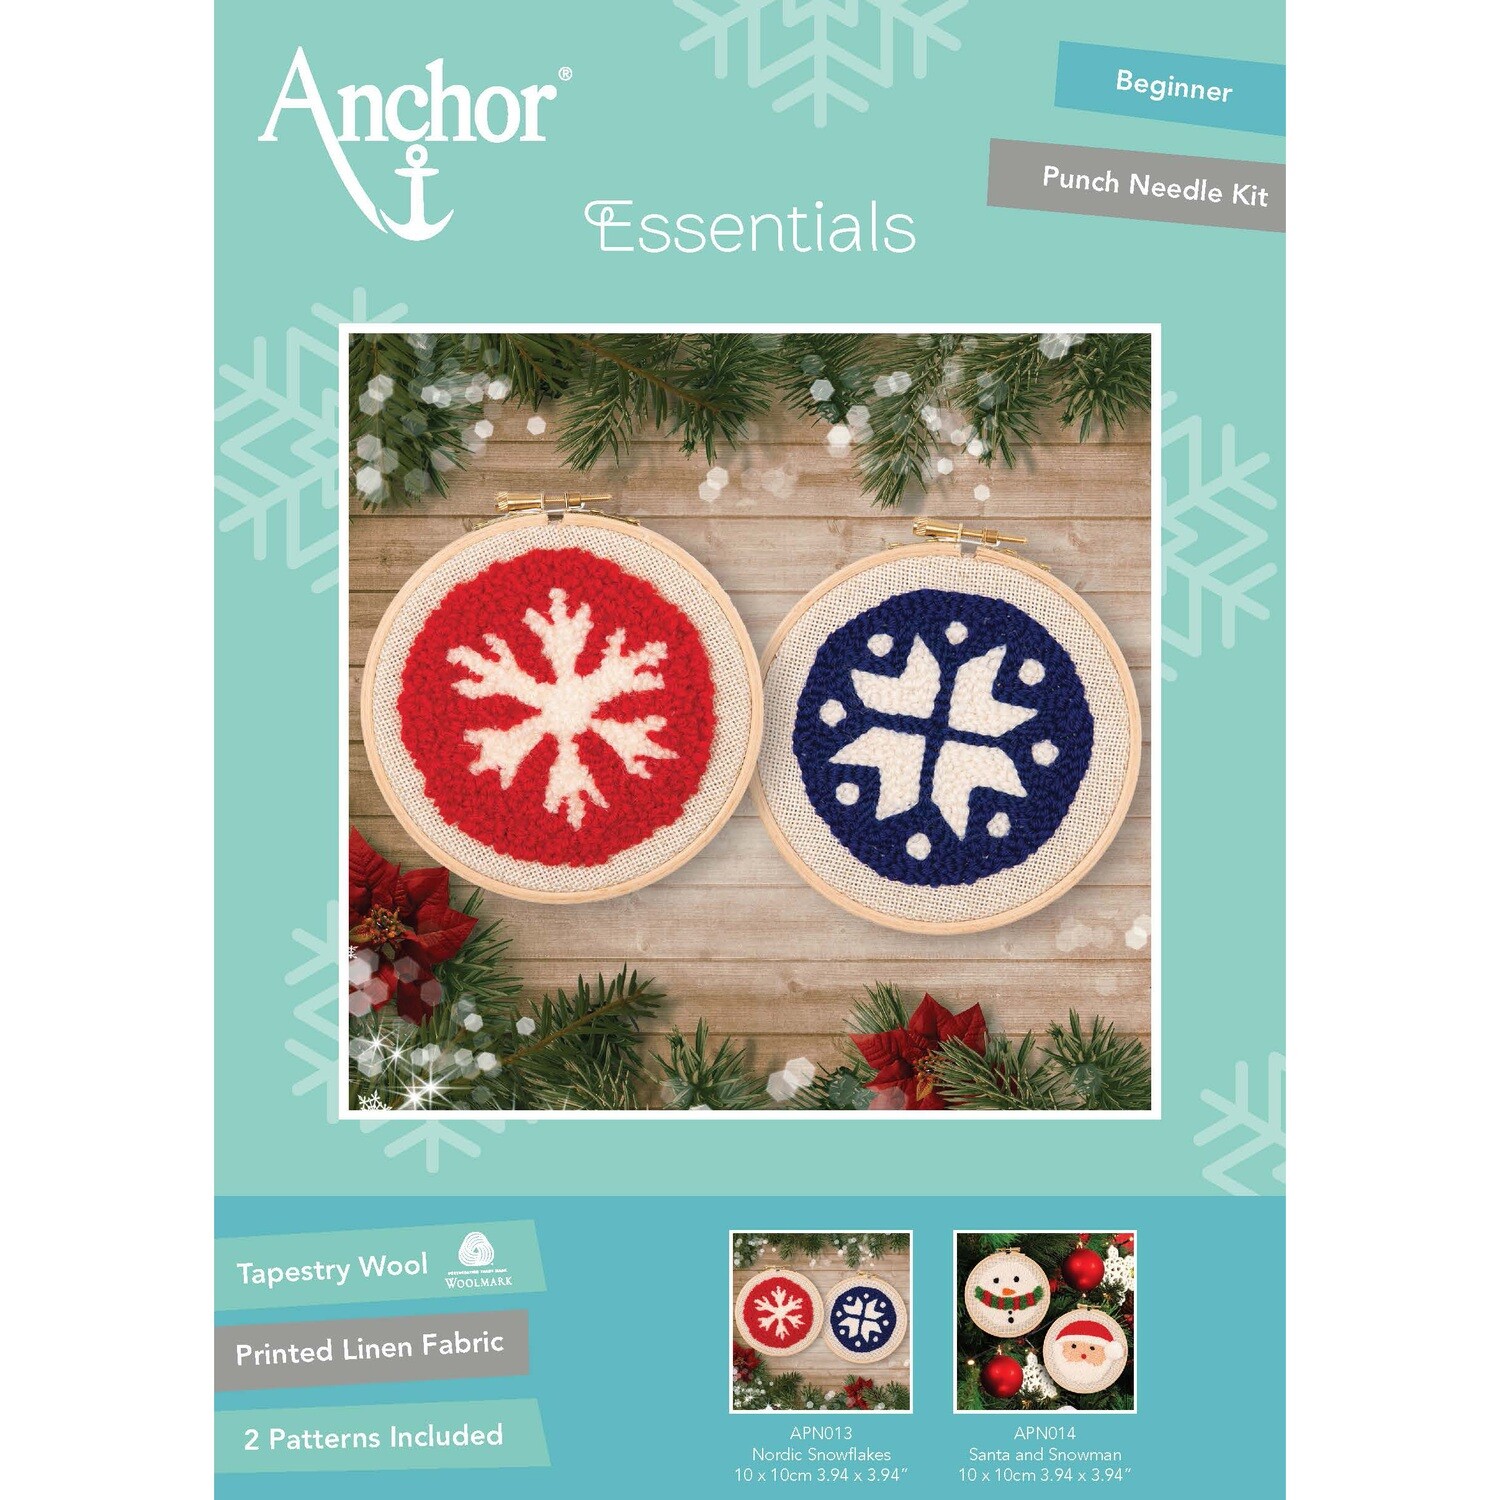 Anchor Essentials Punch Needle Kit - Nordic Snowflakes